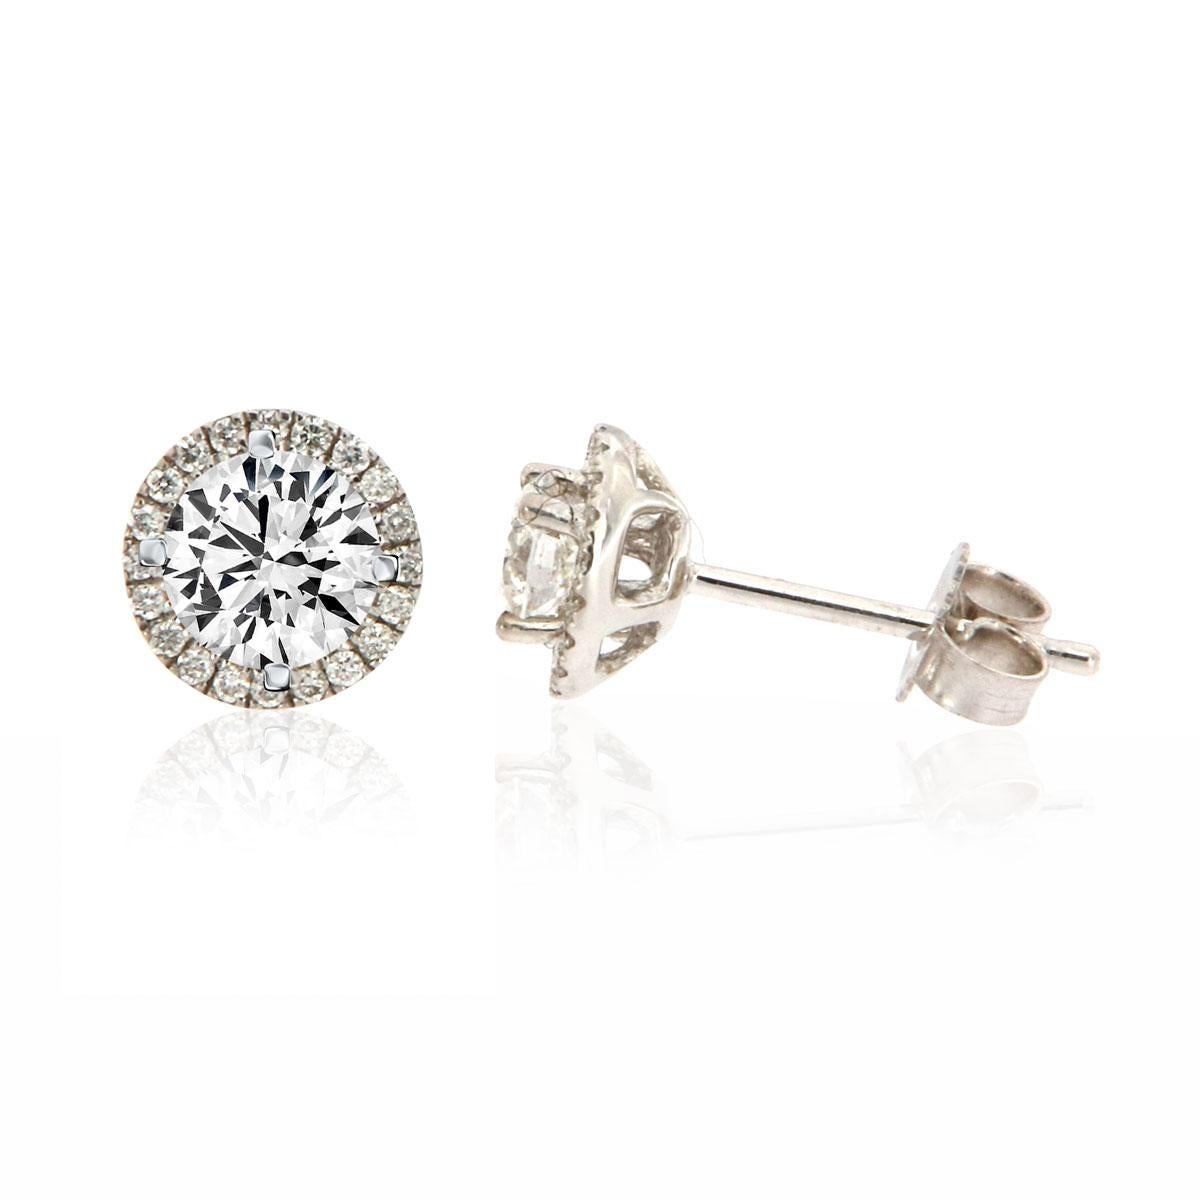 These sparkling halo earrings feature 0.60-carat diamonds in a four-prong setting, surrounded by a brilliant halo of micro-prongs diamond accents in 0.15 carat TW. Experience the Difference!

Product details: 

Center Gemstone Type: NATURAL